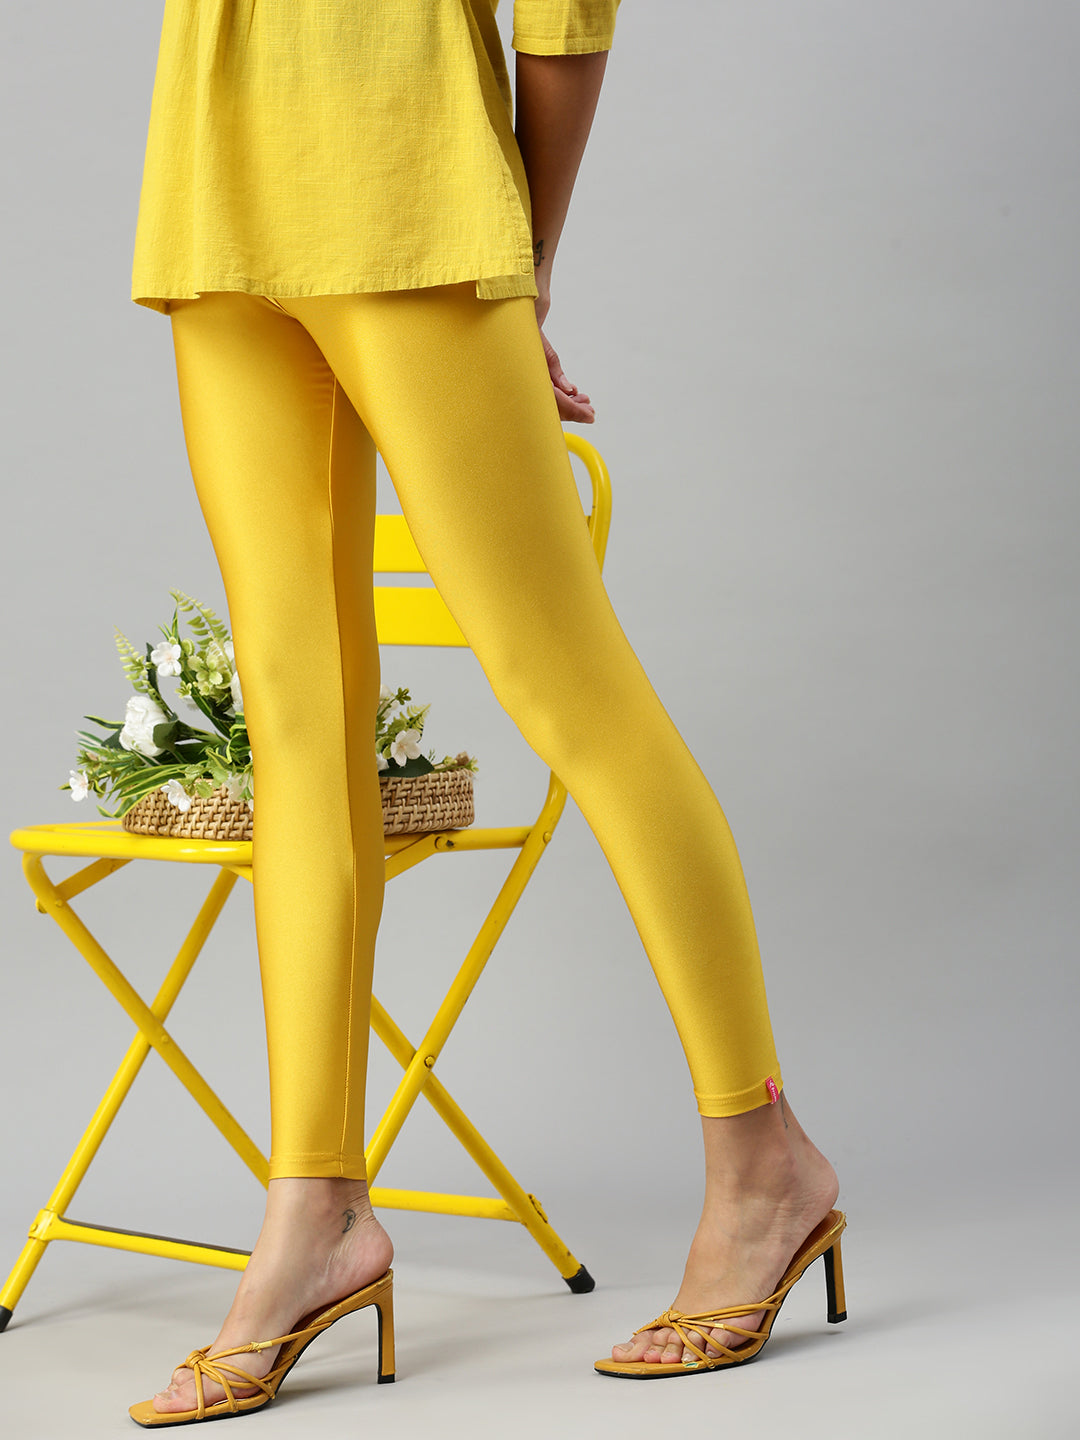 Prisma Shimmer Leggings in Yellow Gold for a Chic Look